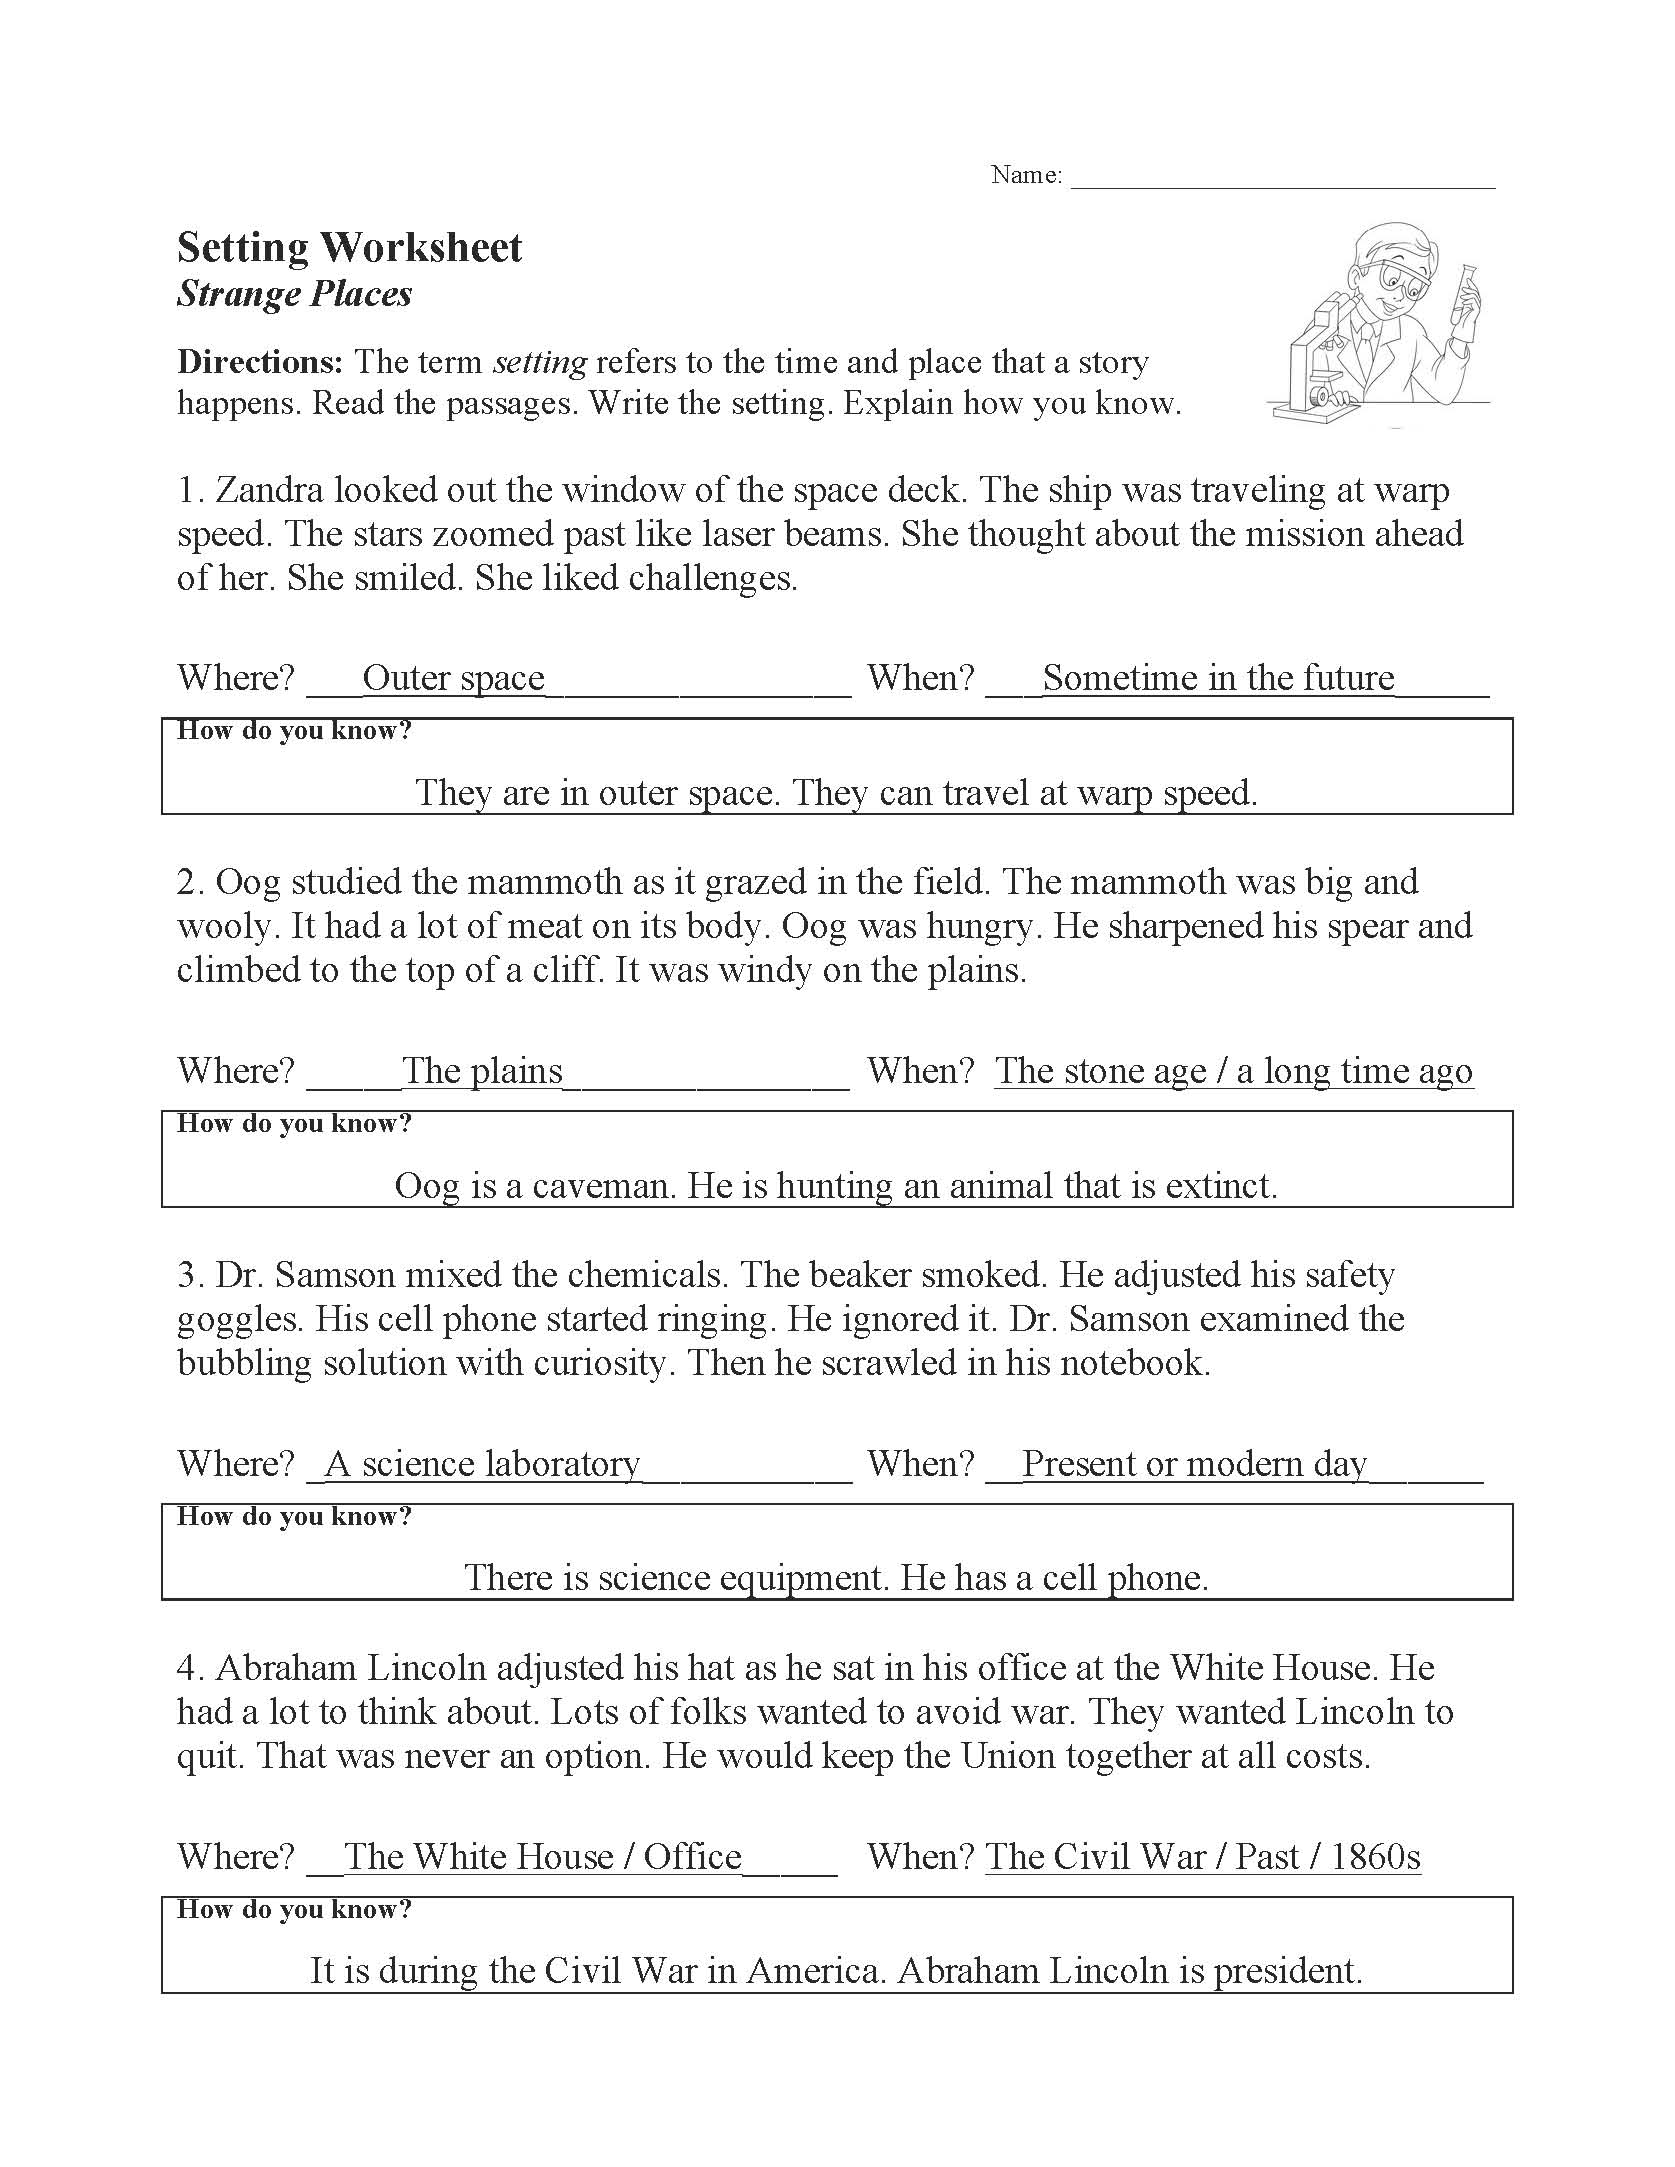 This is a preview image of our Setting Worksheet. Click on it to enlarge this image and view the source file.